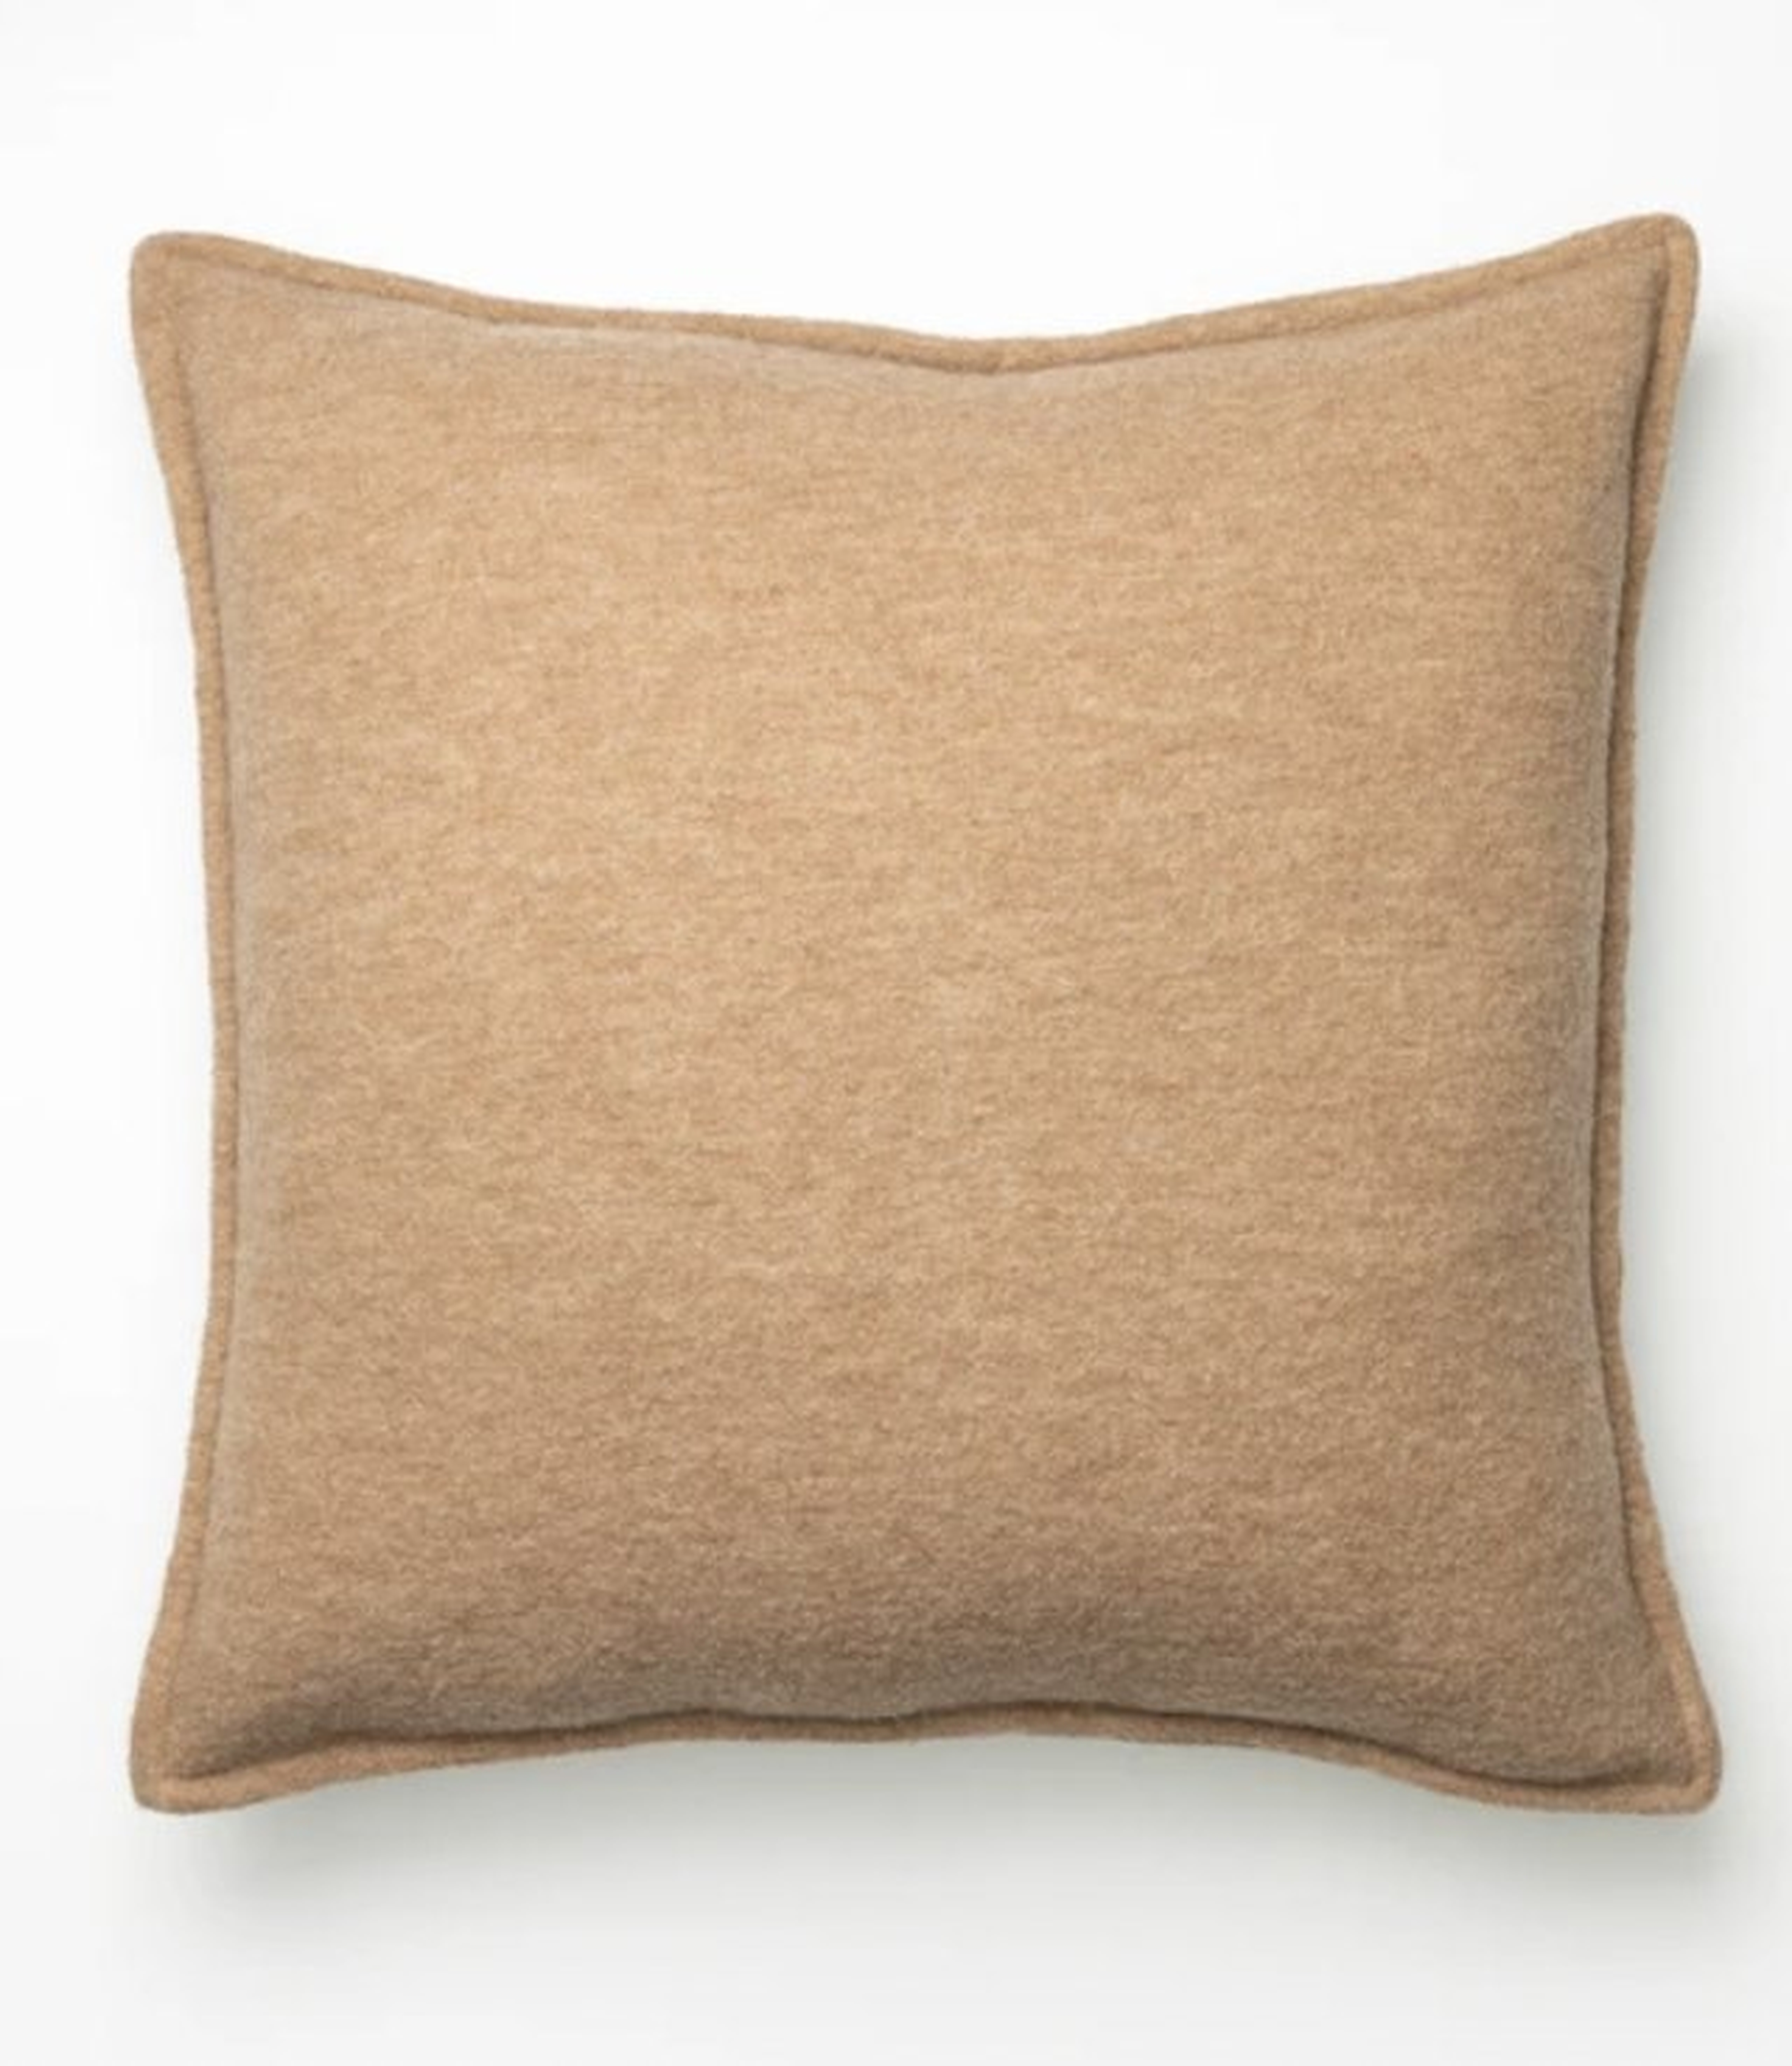 Neil Wool Pillow Cover - McGee & Co.